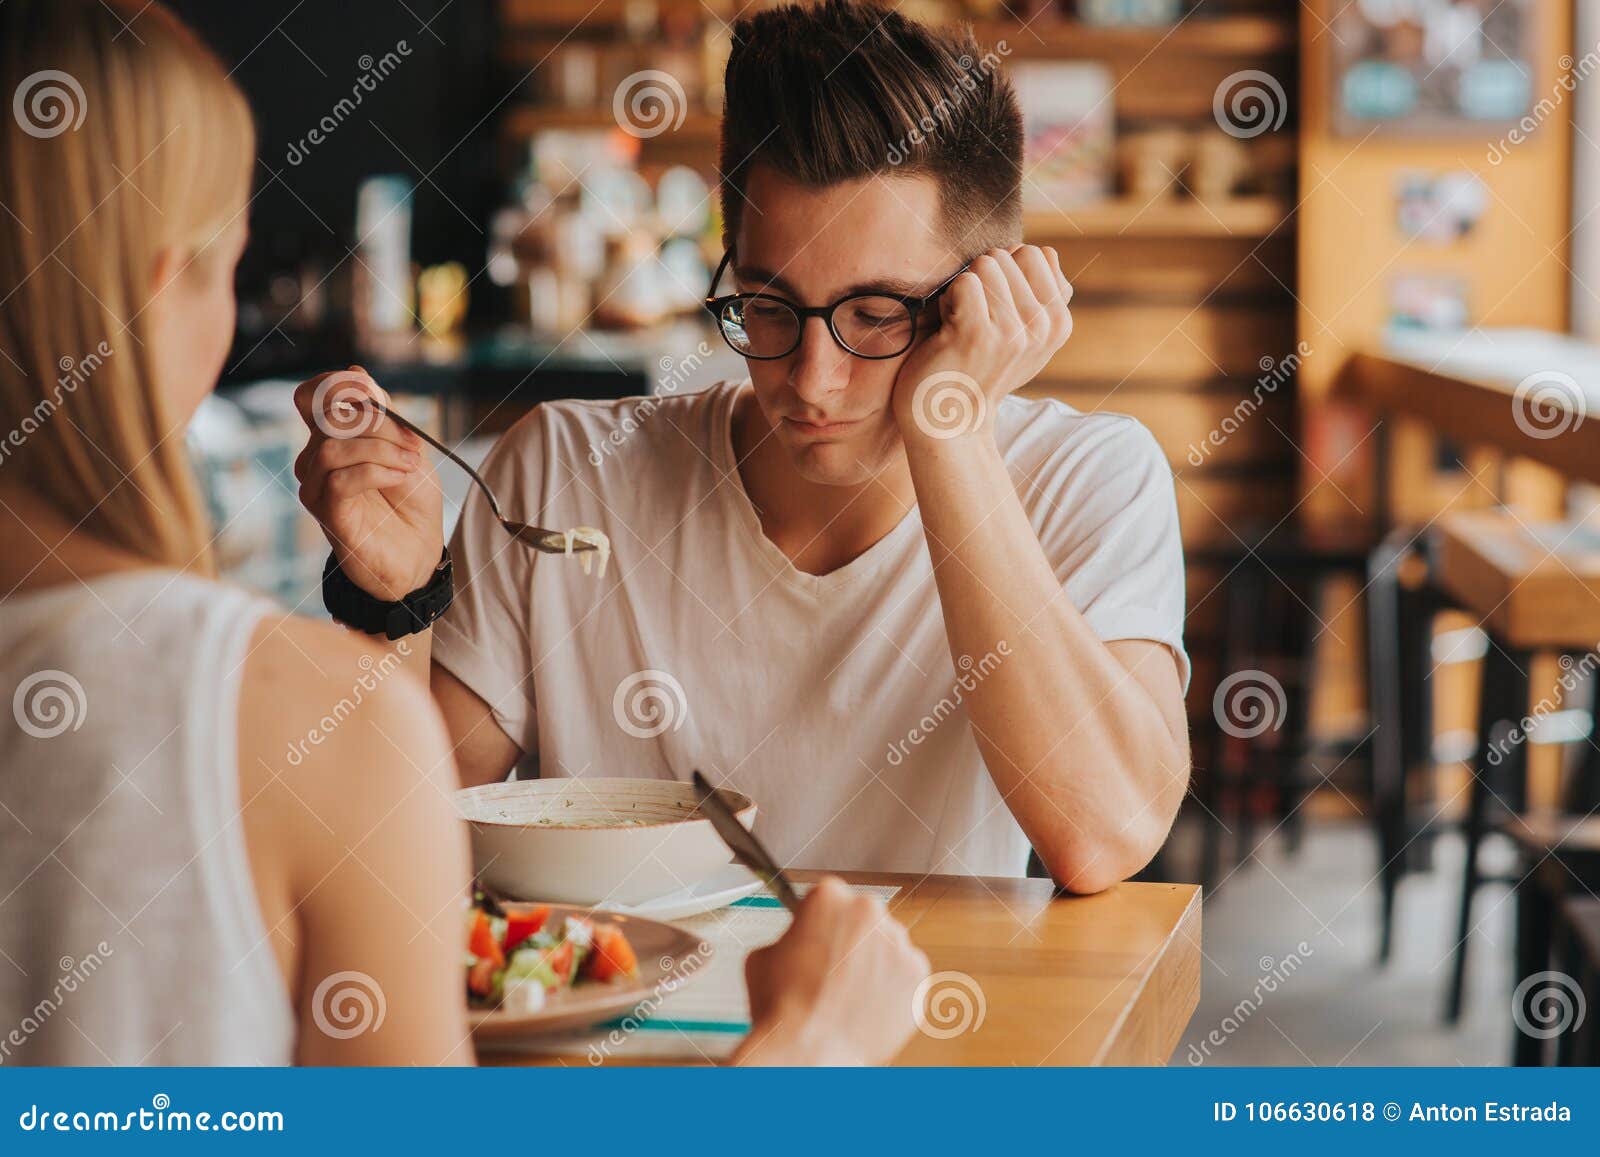 portrait of man with no appetite